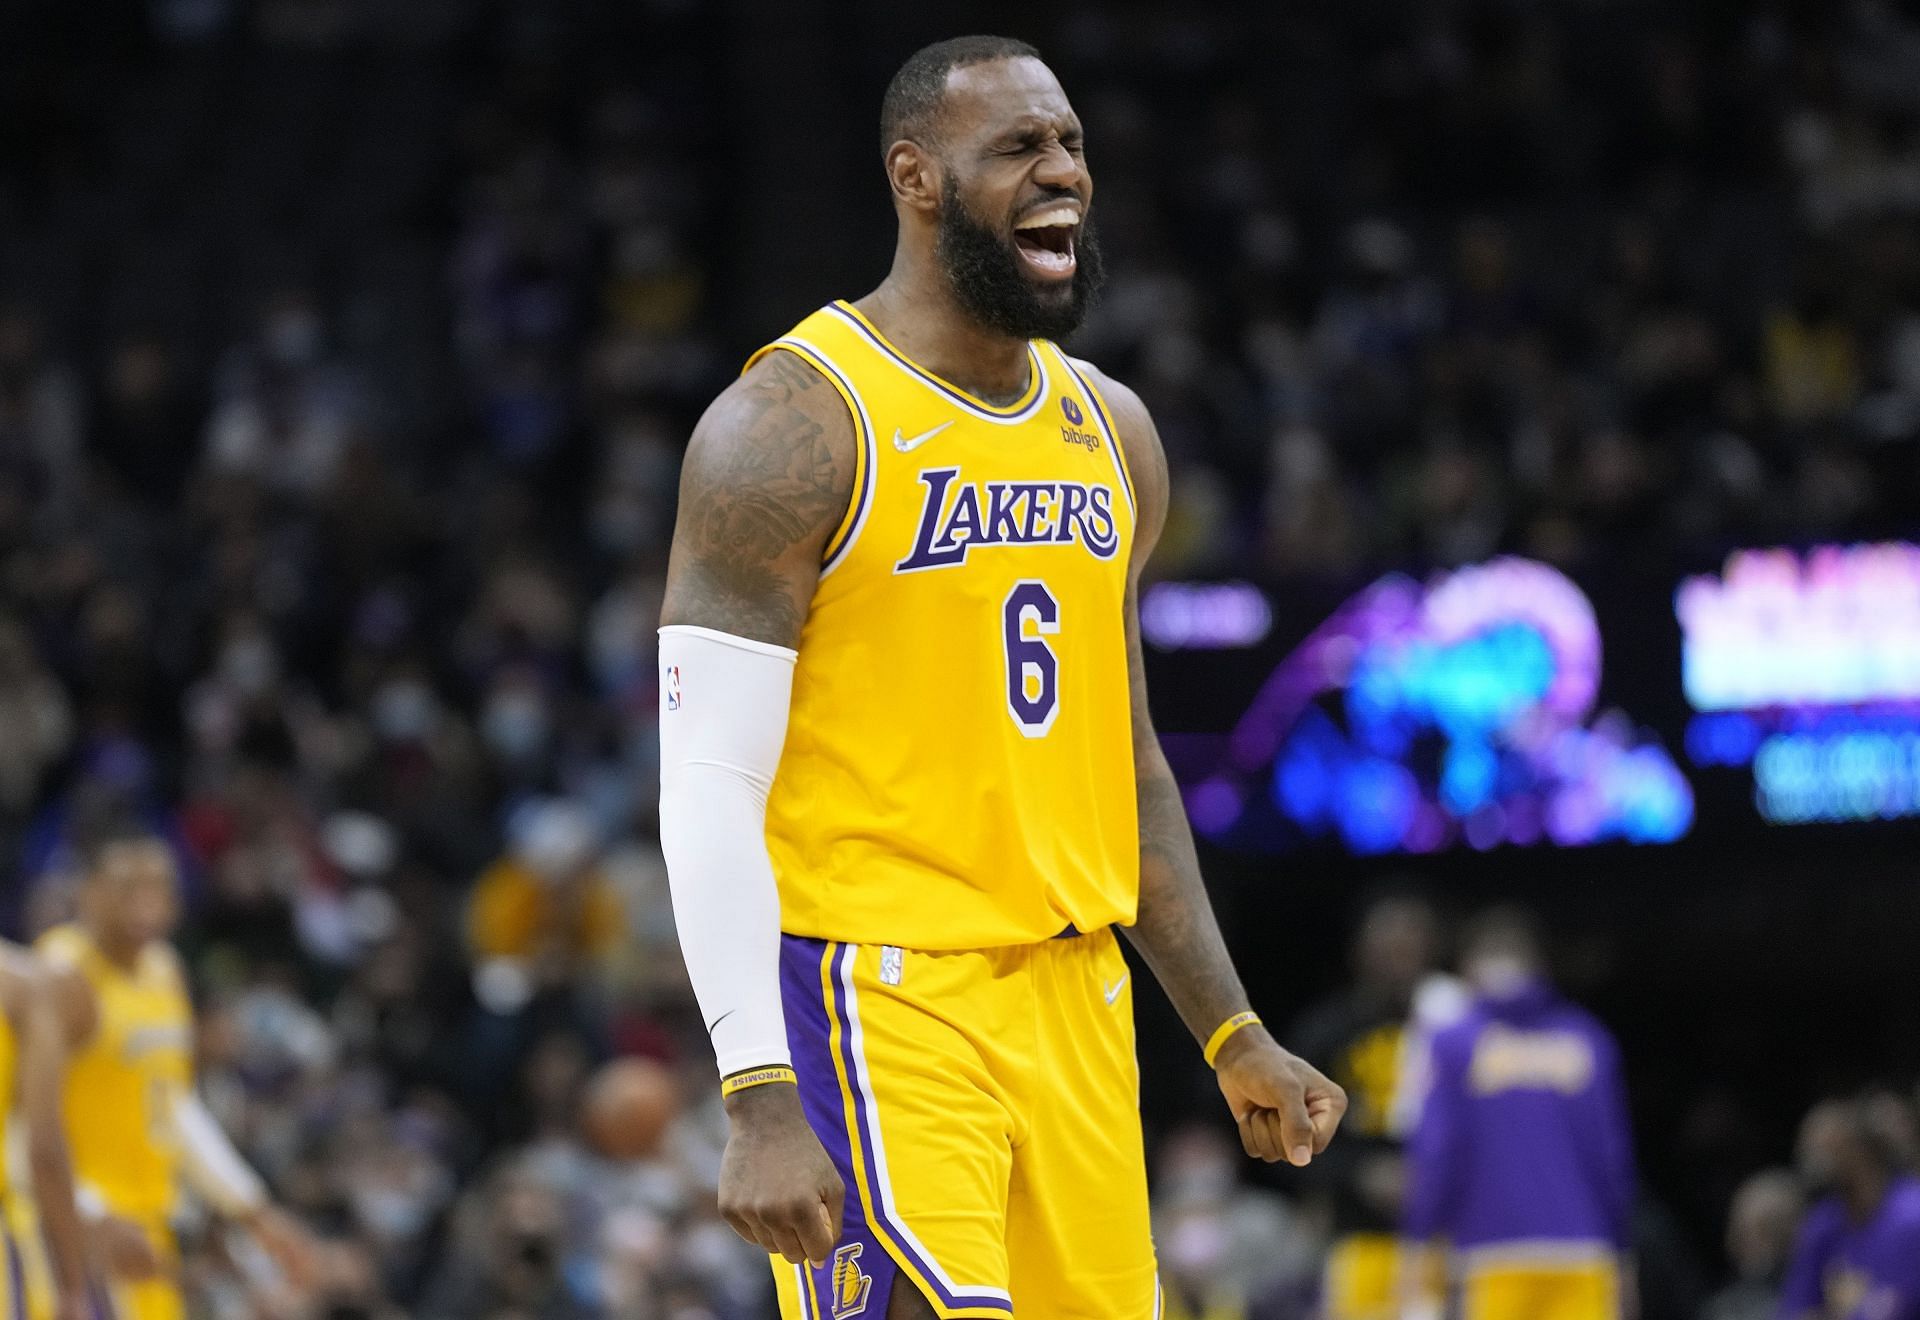 LeBron James of the LA Lakers is in his 19th season.